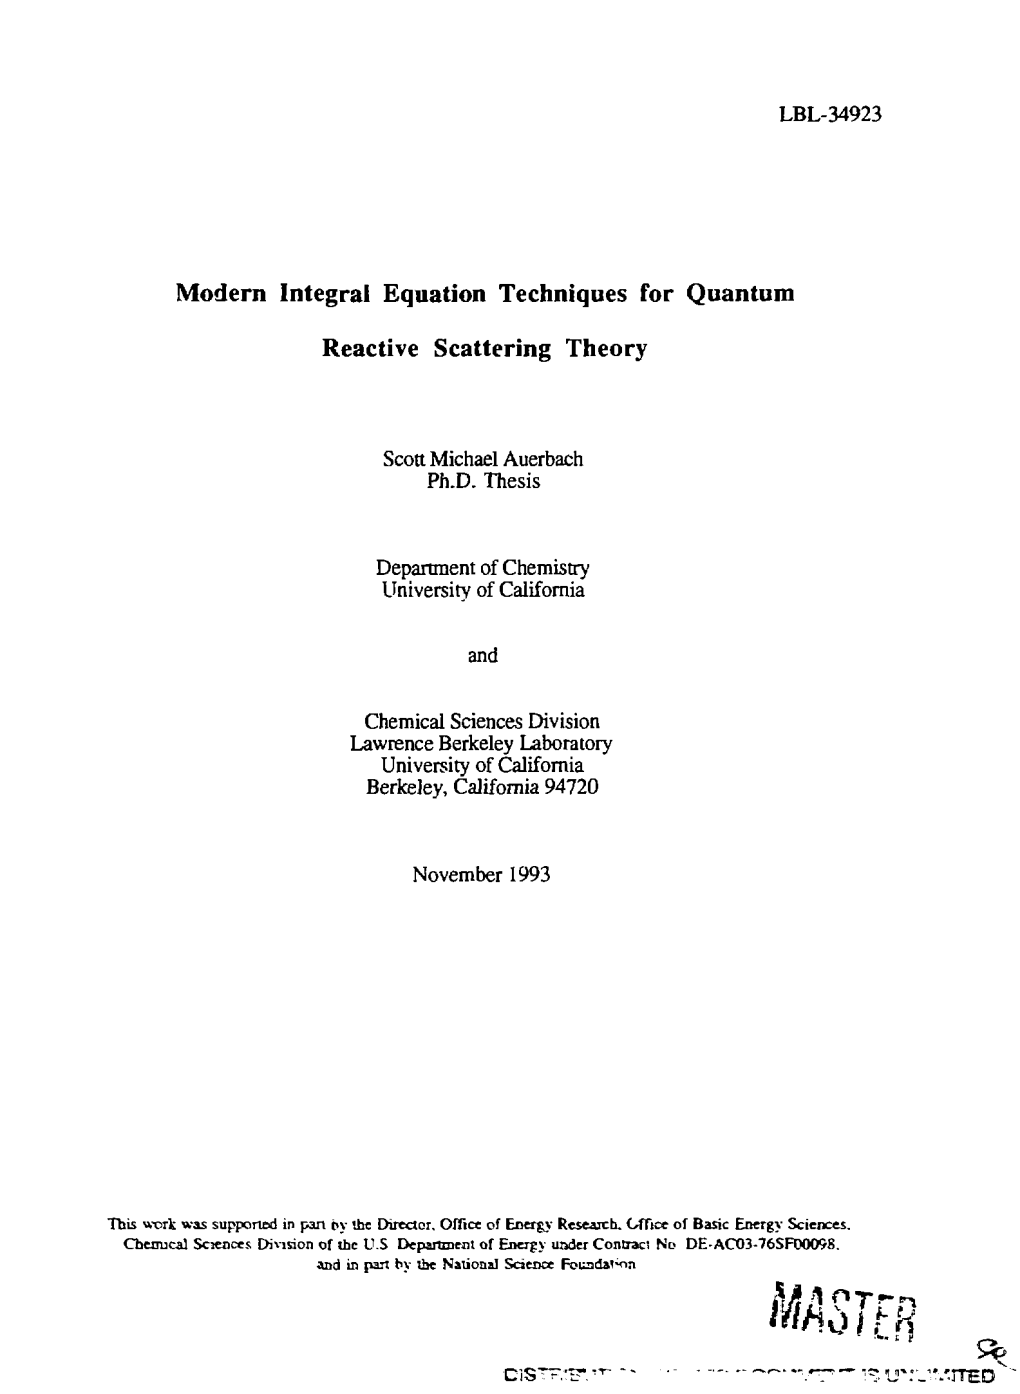 Modern Integral Equation Techniques for Quantum Reactive Scattering Theory